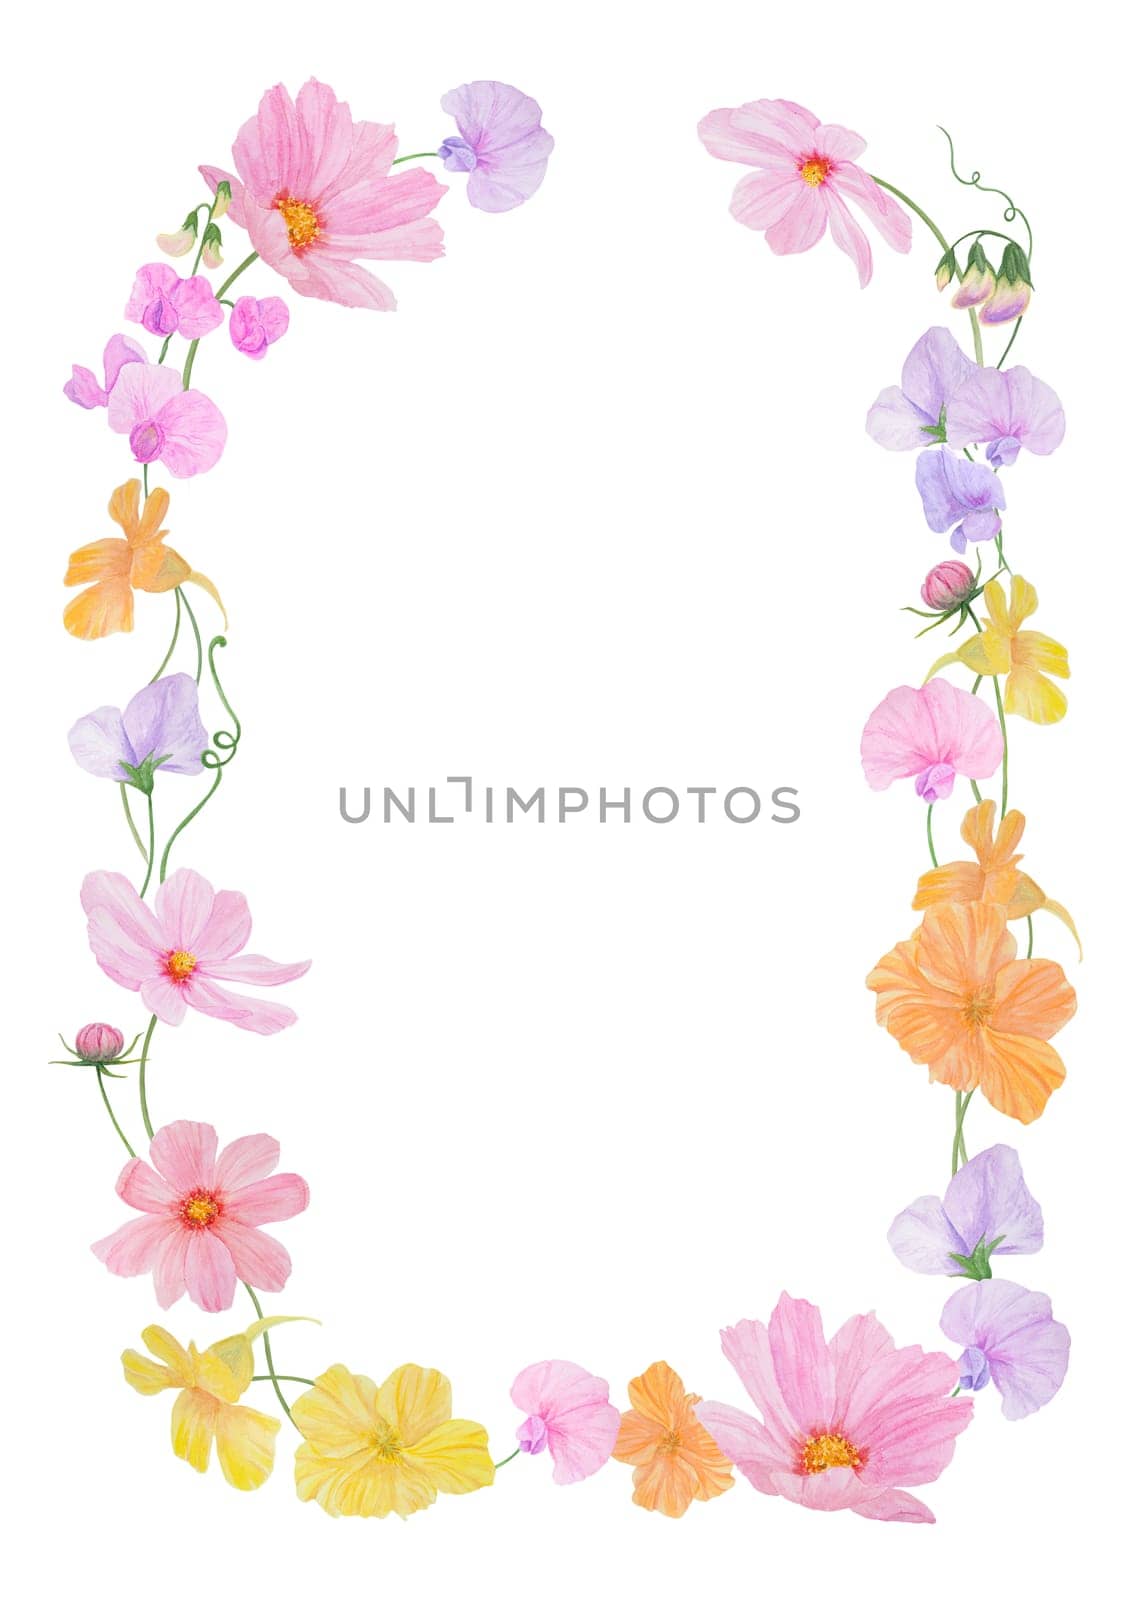 Watercolor botanical colourful frame of summer and autumn flowers: pink and lilac lathyrus and yellow and orange nasturtium. Hand drawn clipart for wedding print products, paper, invitation, greeting by florainlove_art